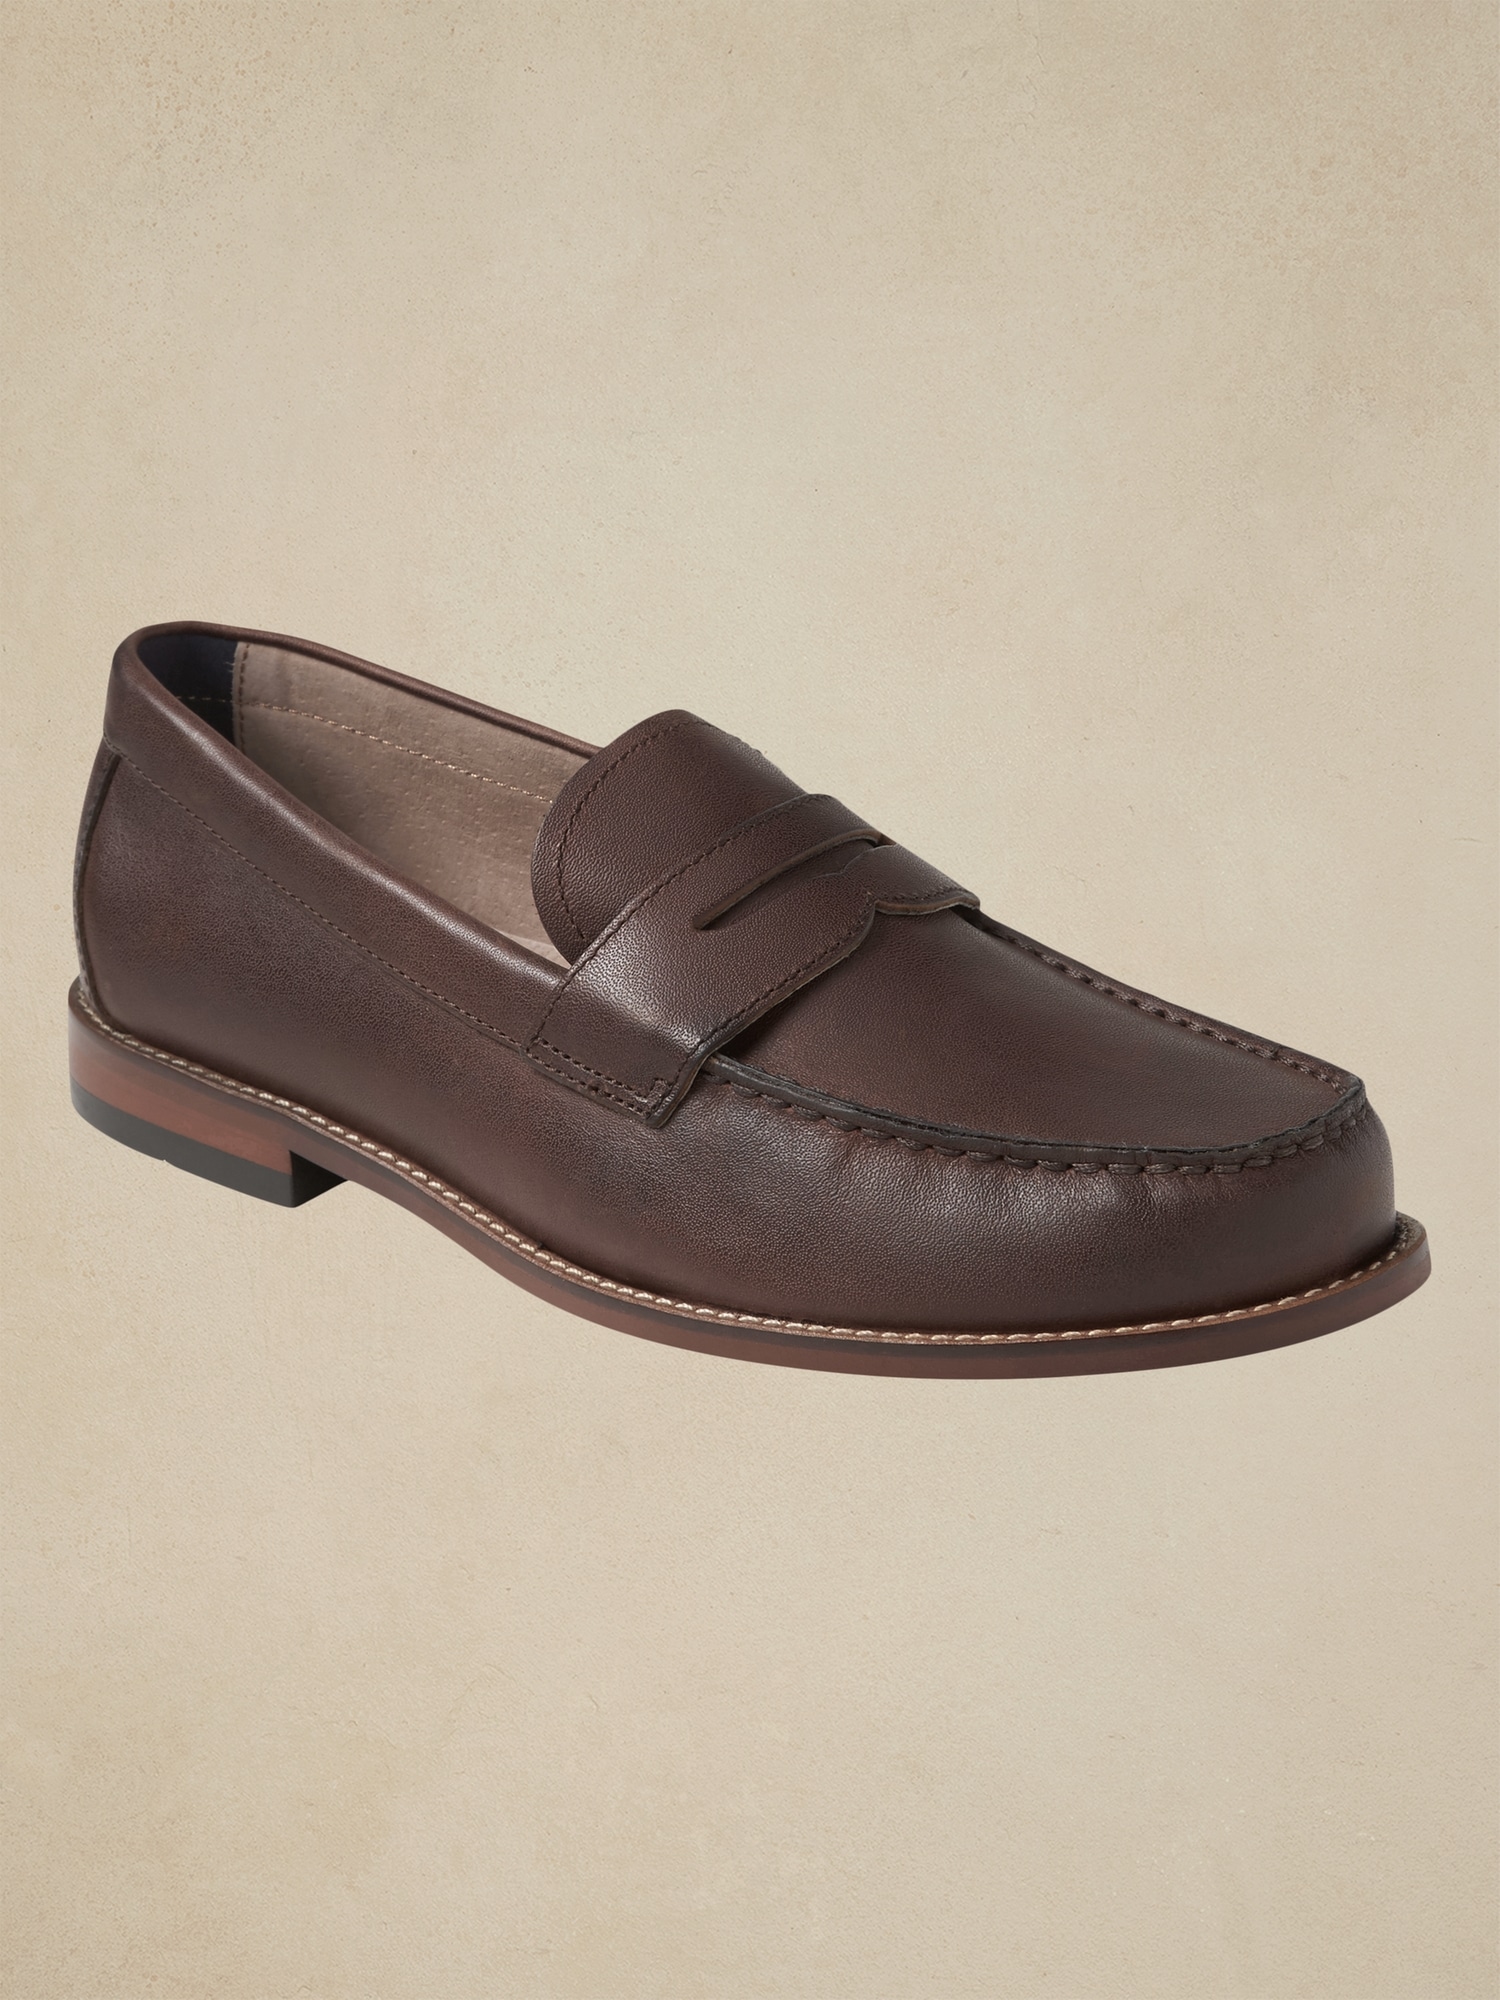 Ralston Loafer